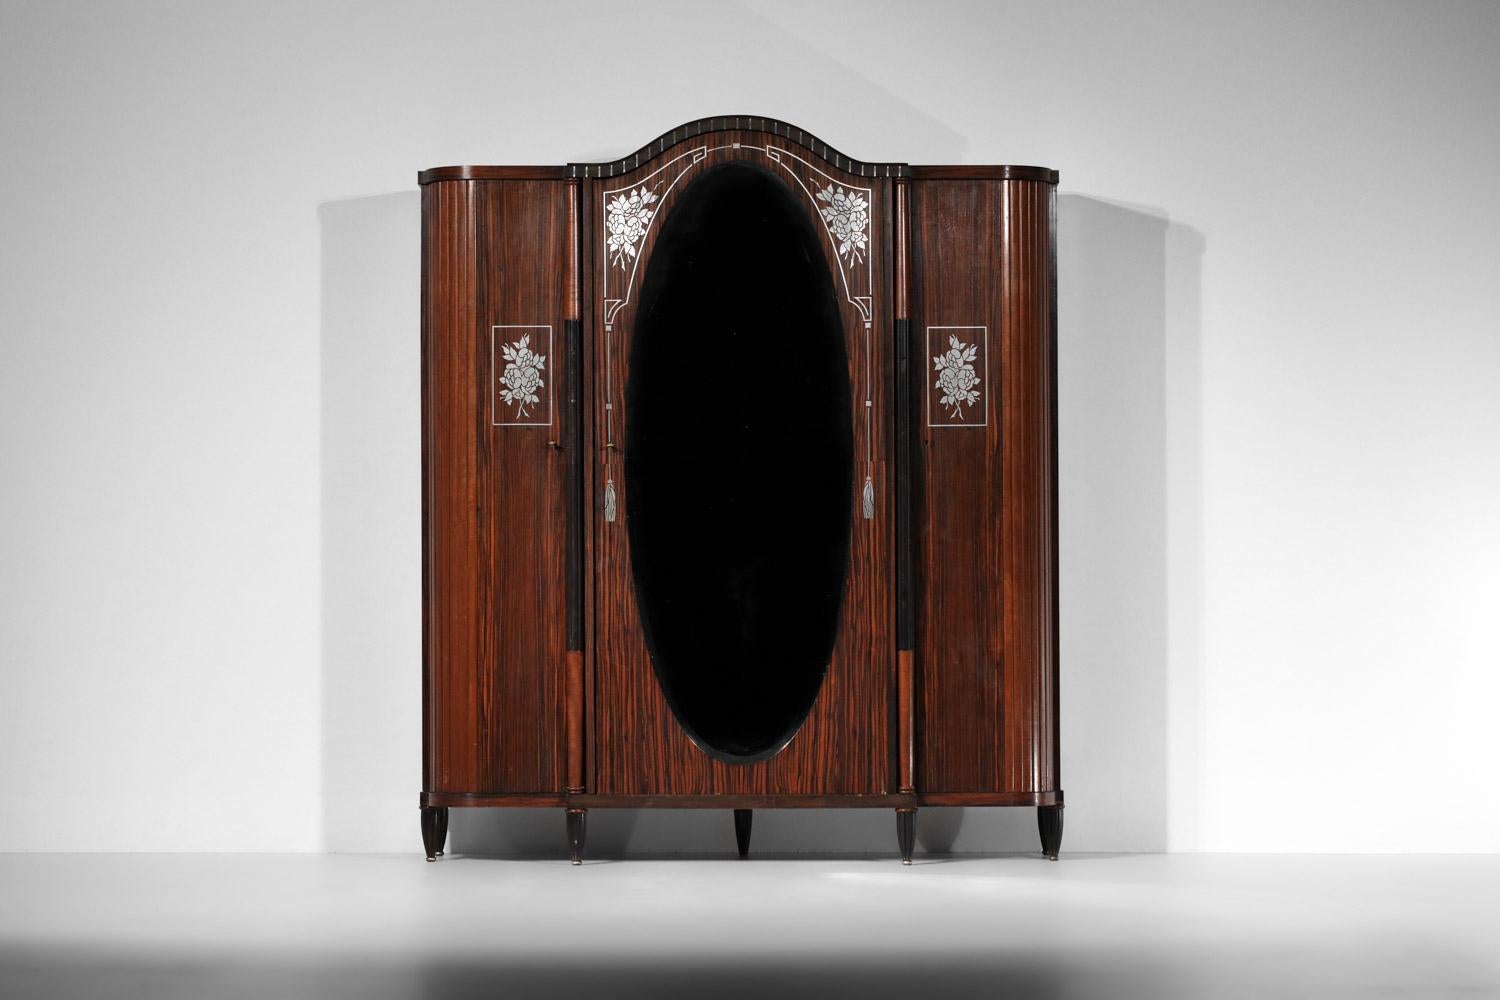 Large 1930s art deco wardrobe in the style of Maurice Dufrène. 
This armoire has two hinged side doors opening onto a series of shelves and a central door with a large mirror opening onto a wardrobe. 
Very nice decorative work with marquetry using